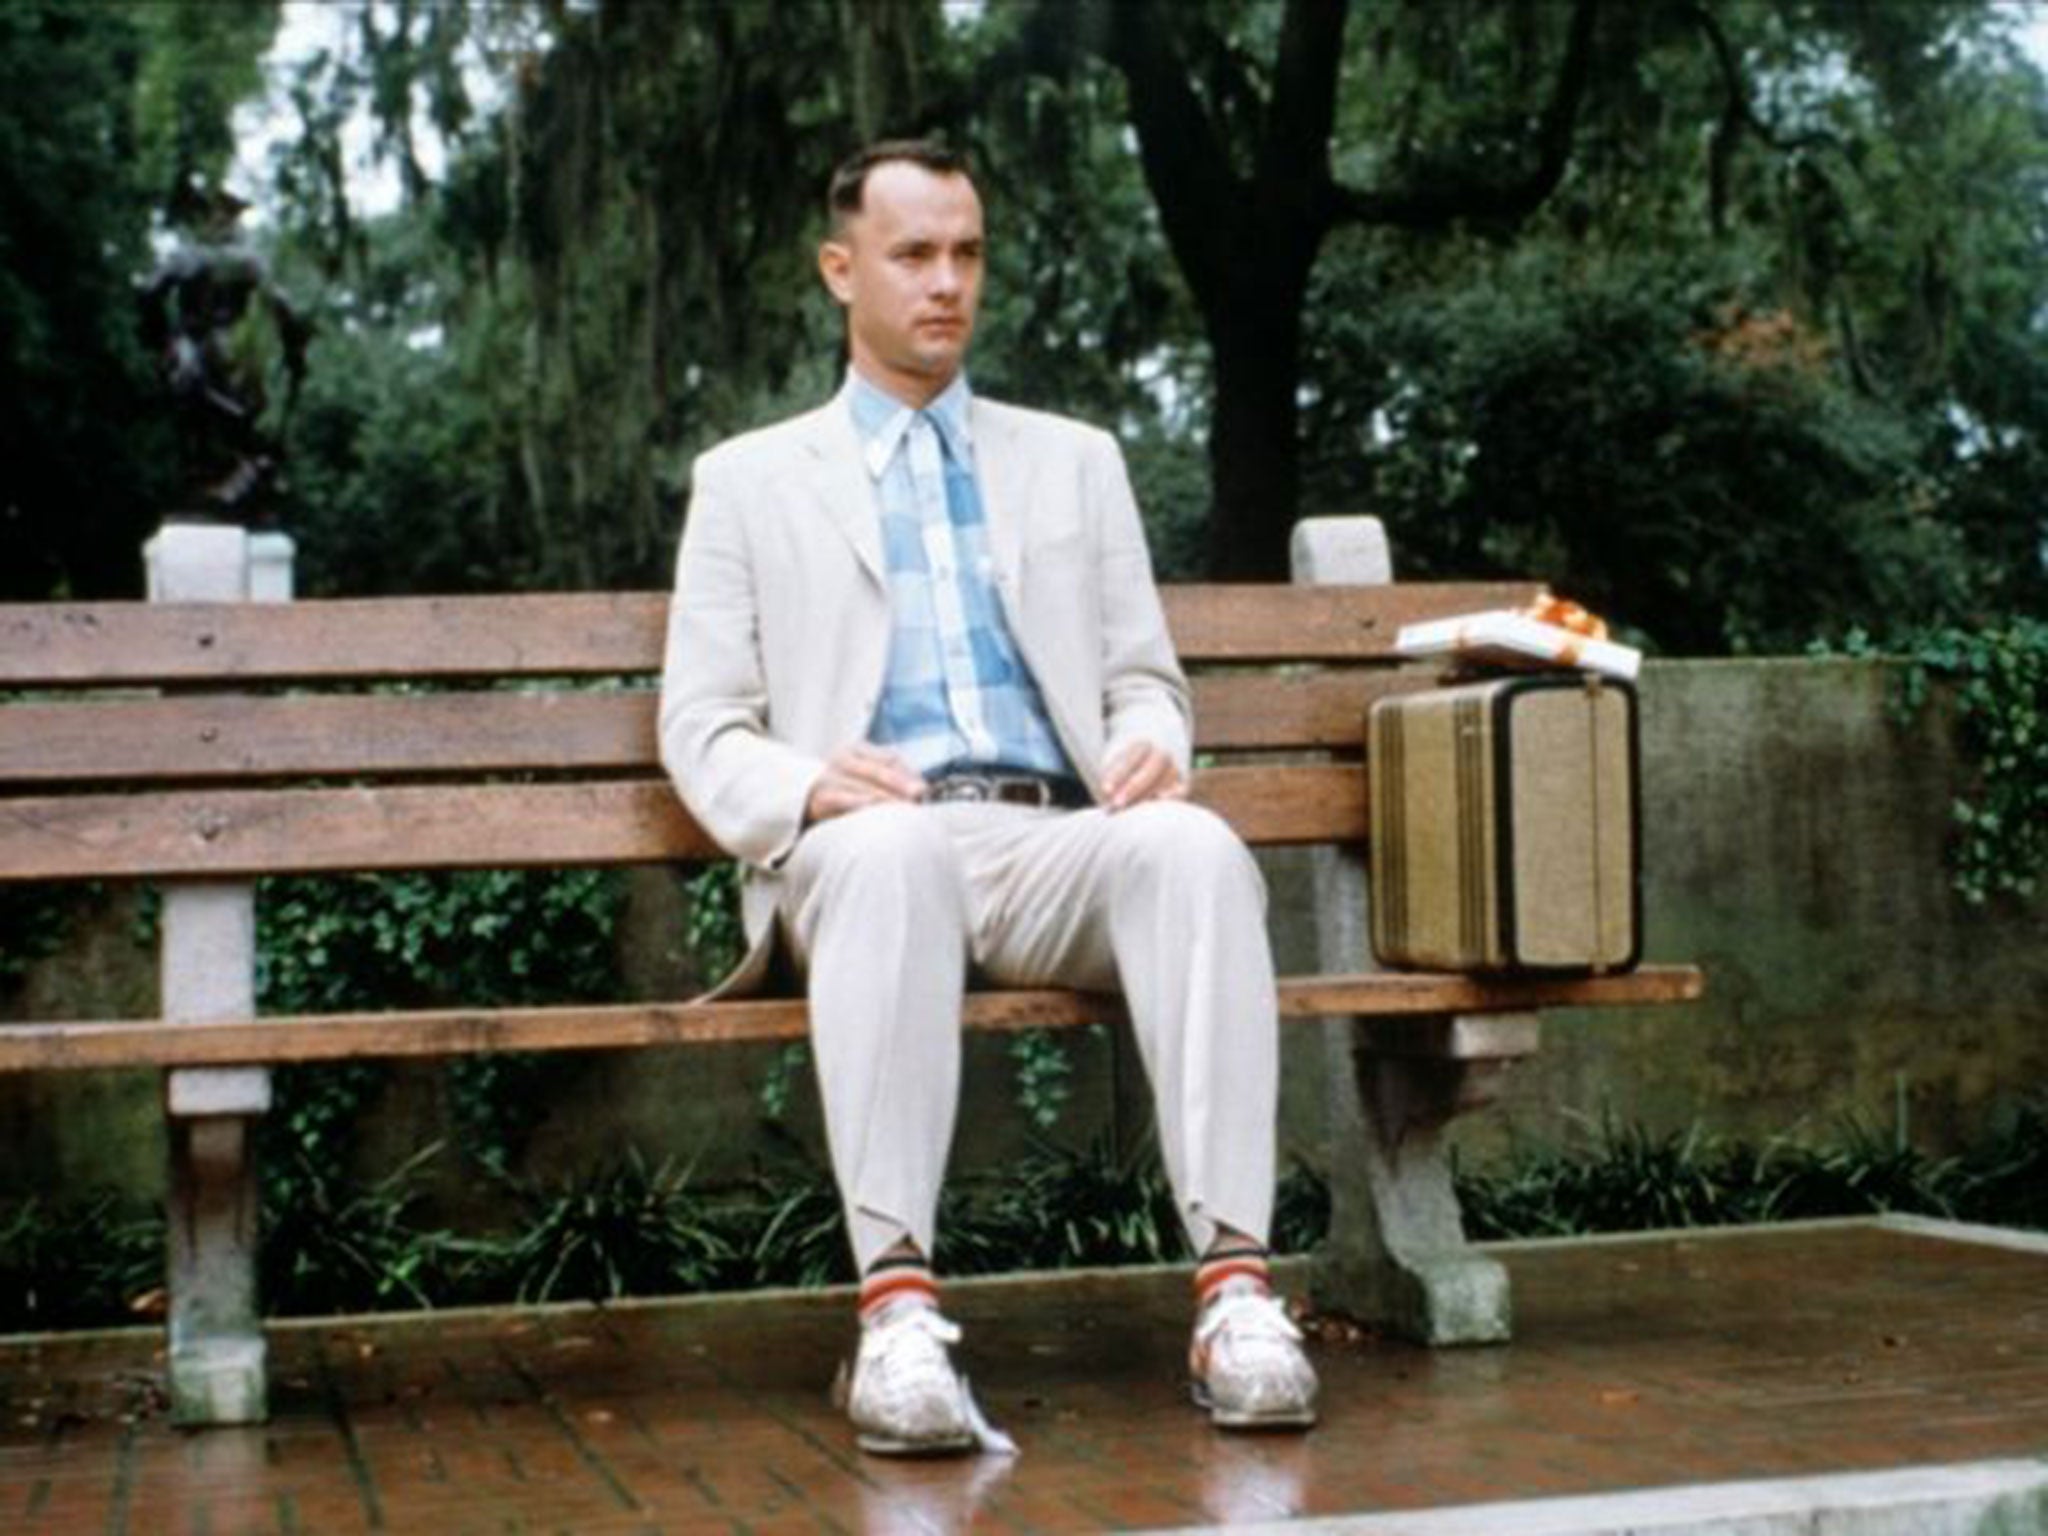 Owen said he finds films boring but Tom Hanks managed to hold his attention in Forrest Gump